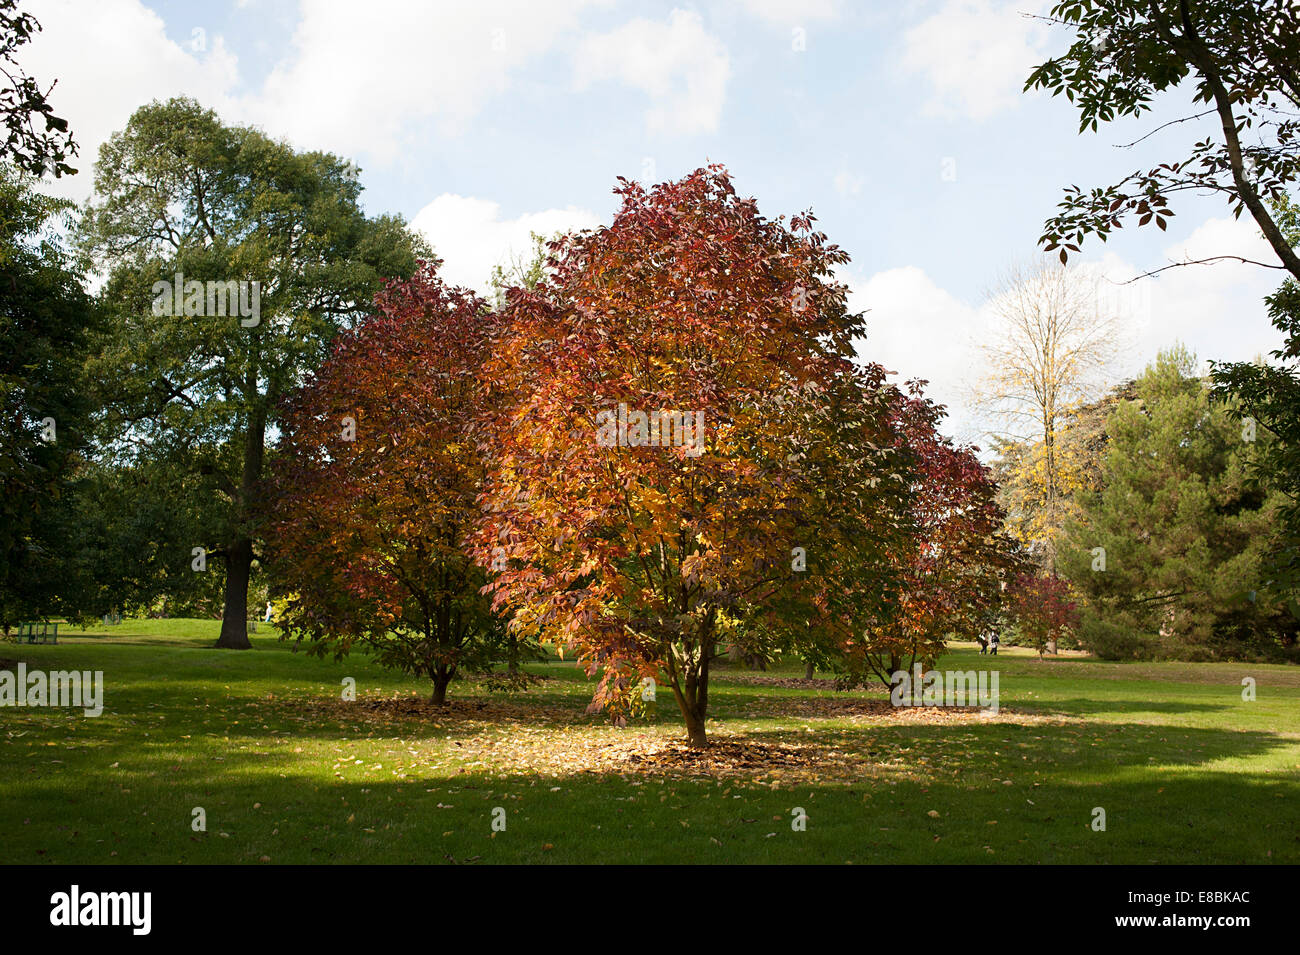 Beautiful trees in Kew Gardens showing stunning autumnal reddish color changes to leaves. Stock Photo